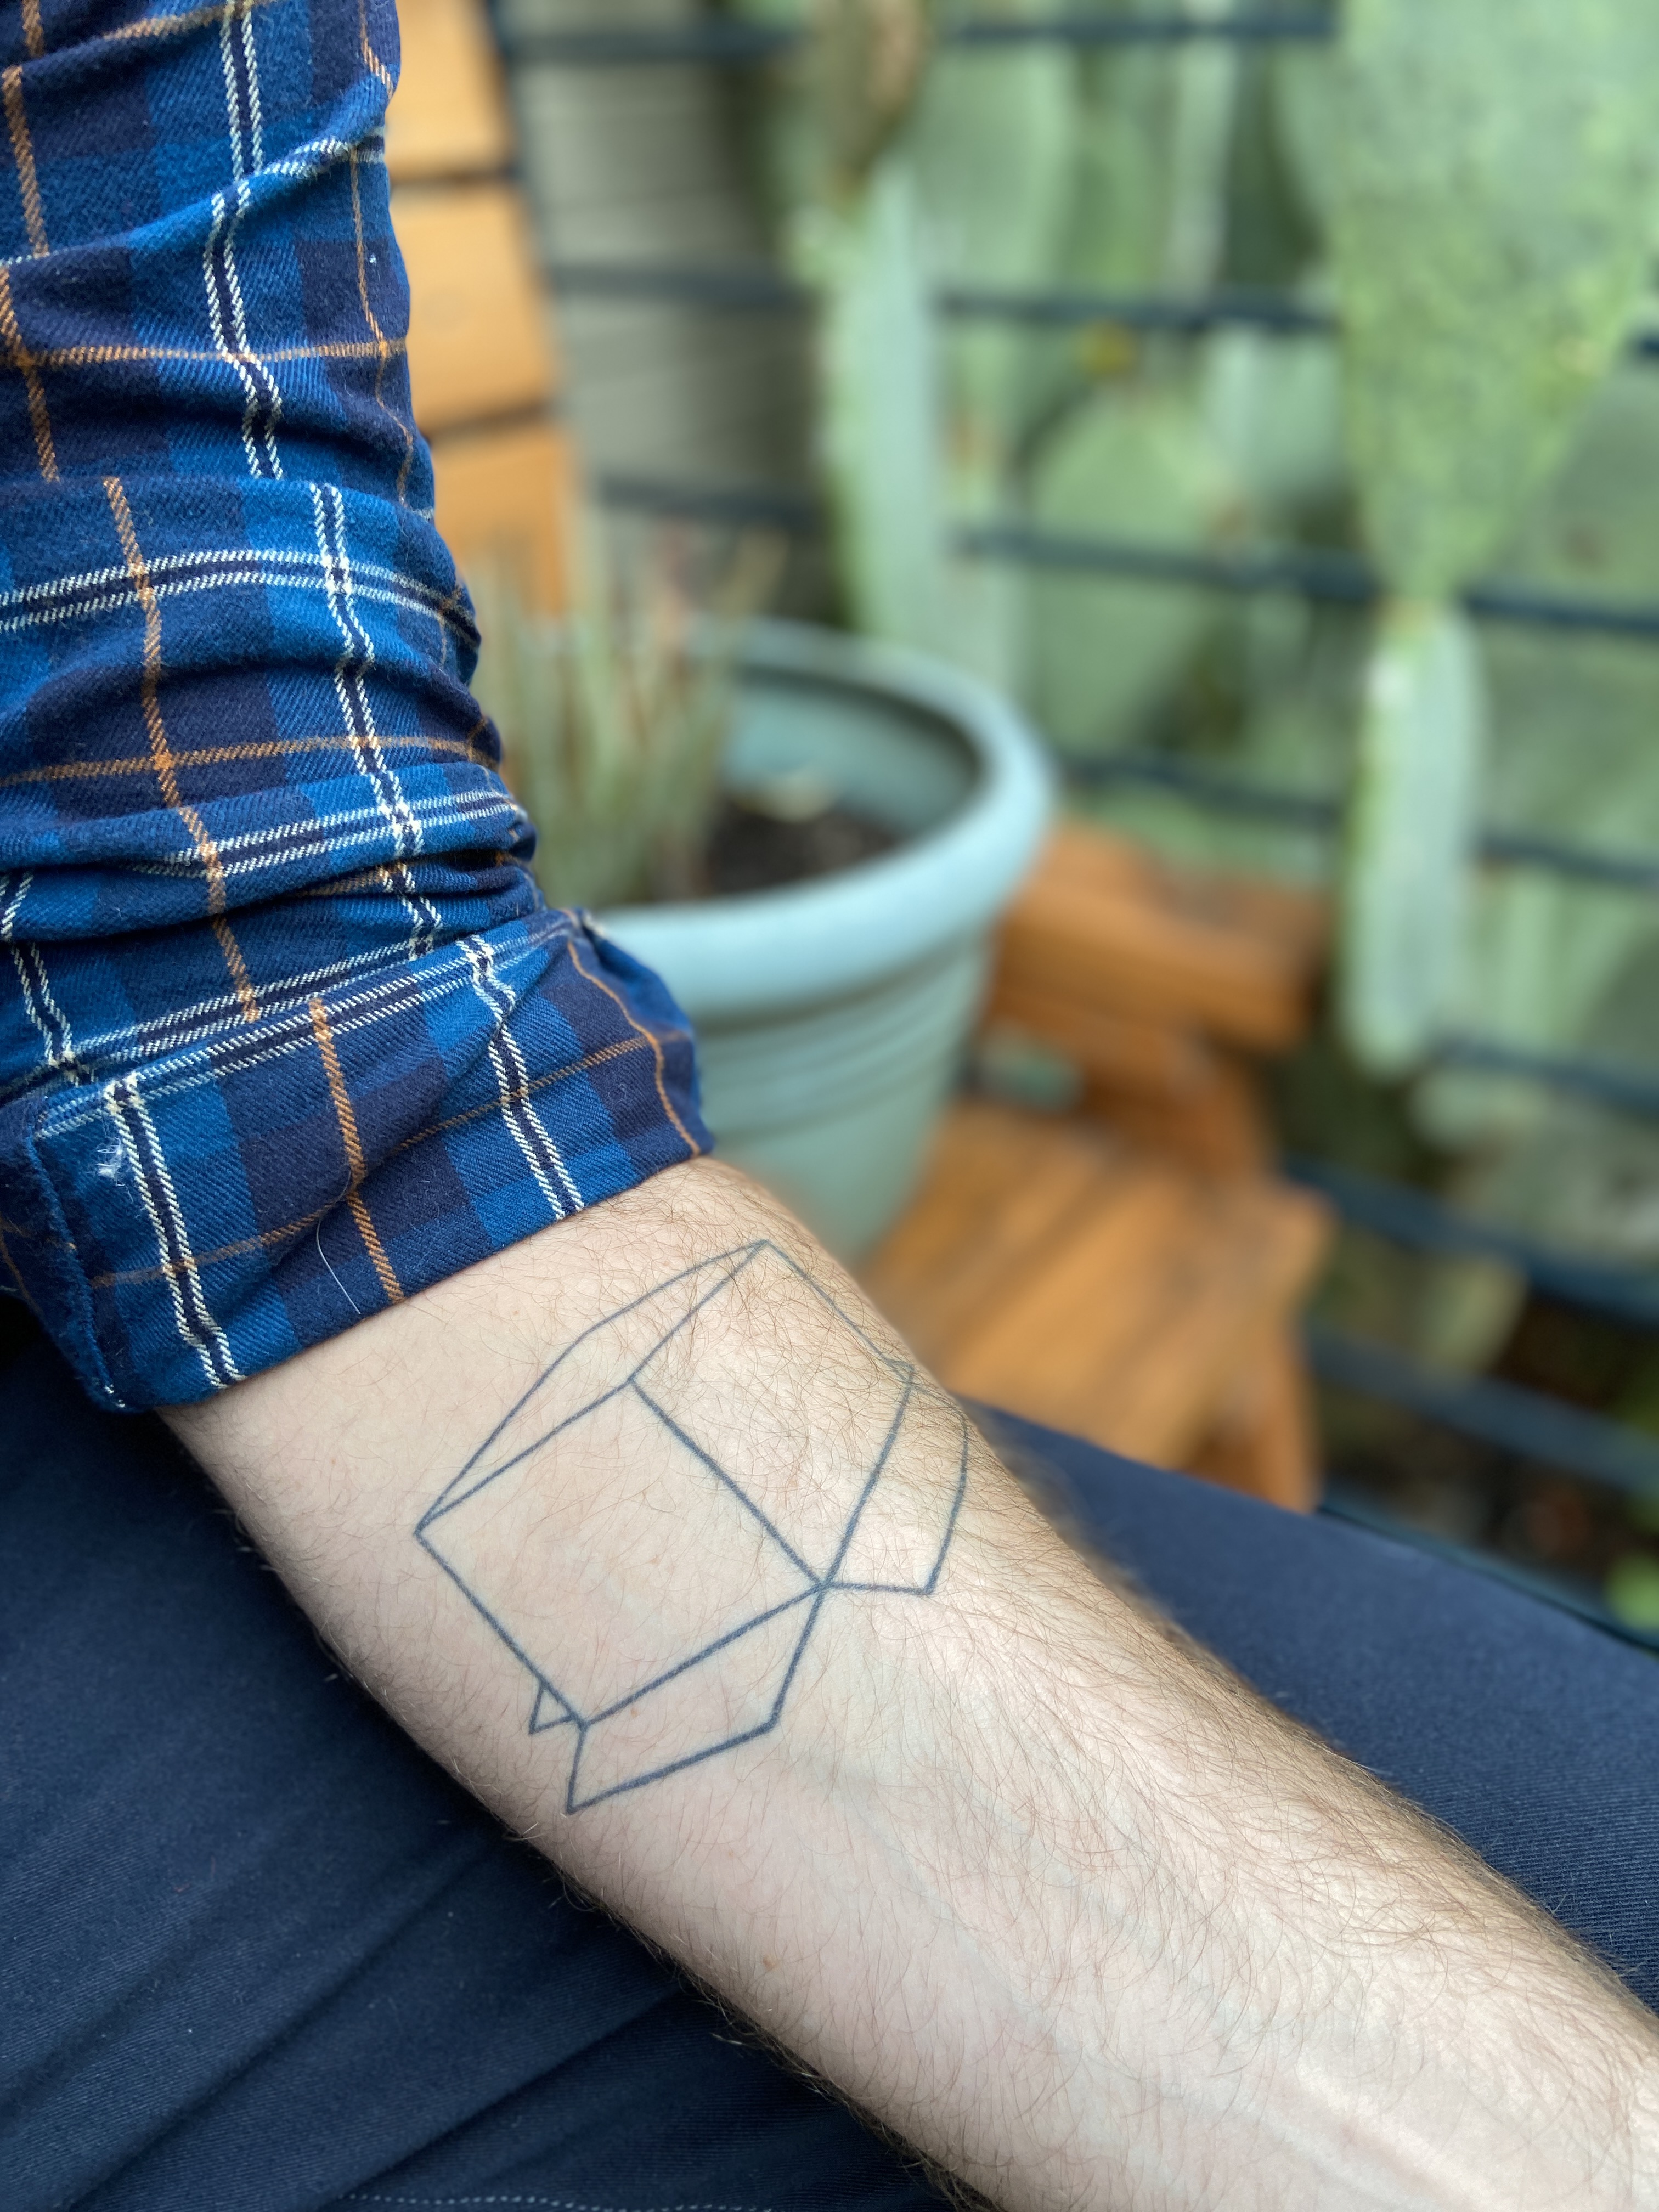 The Man with the Box Tattoo | Futurism